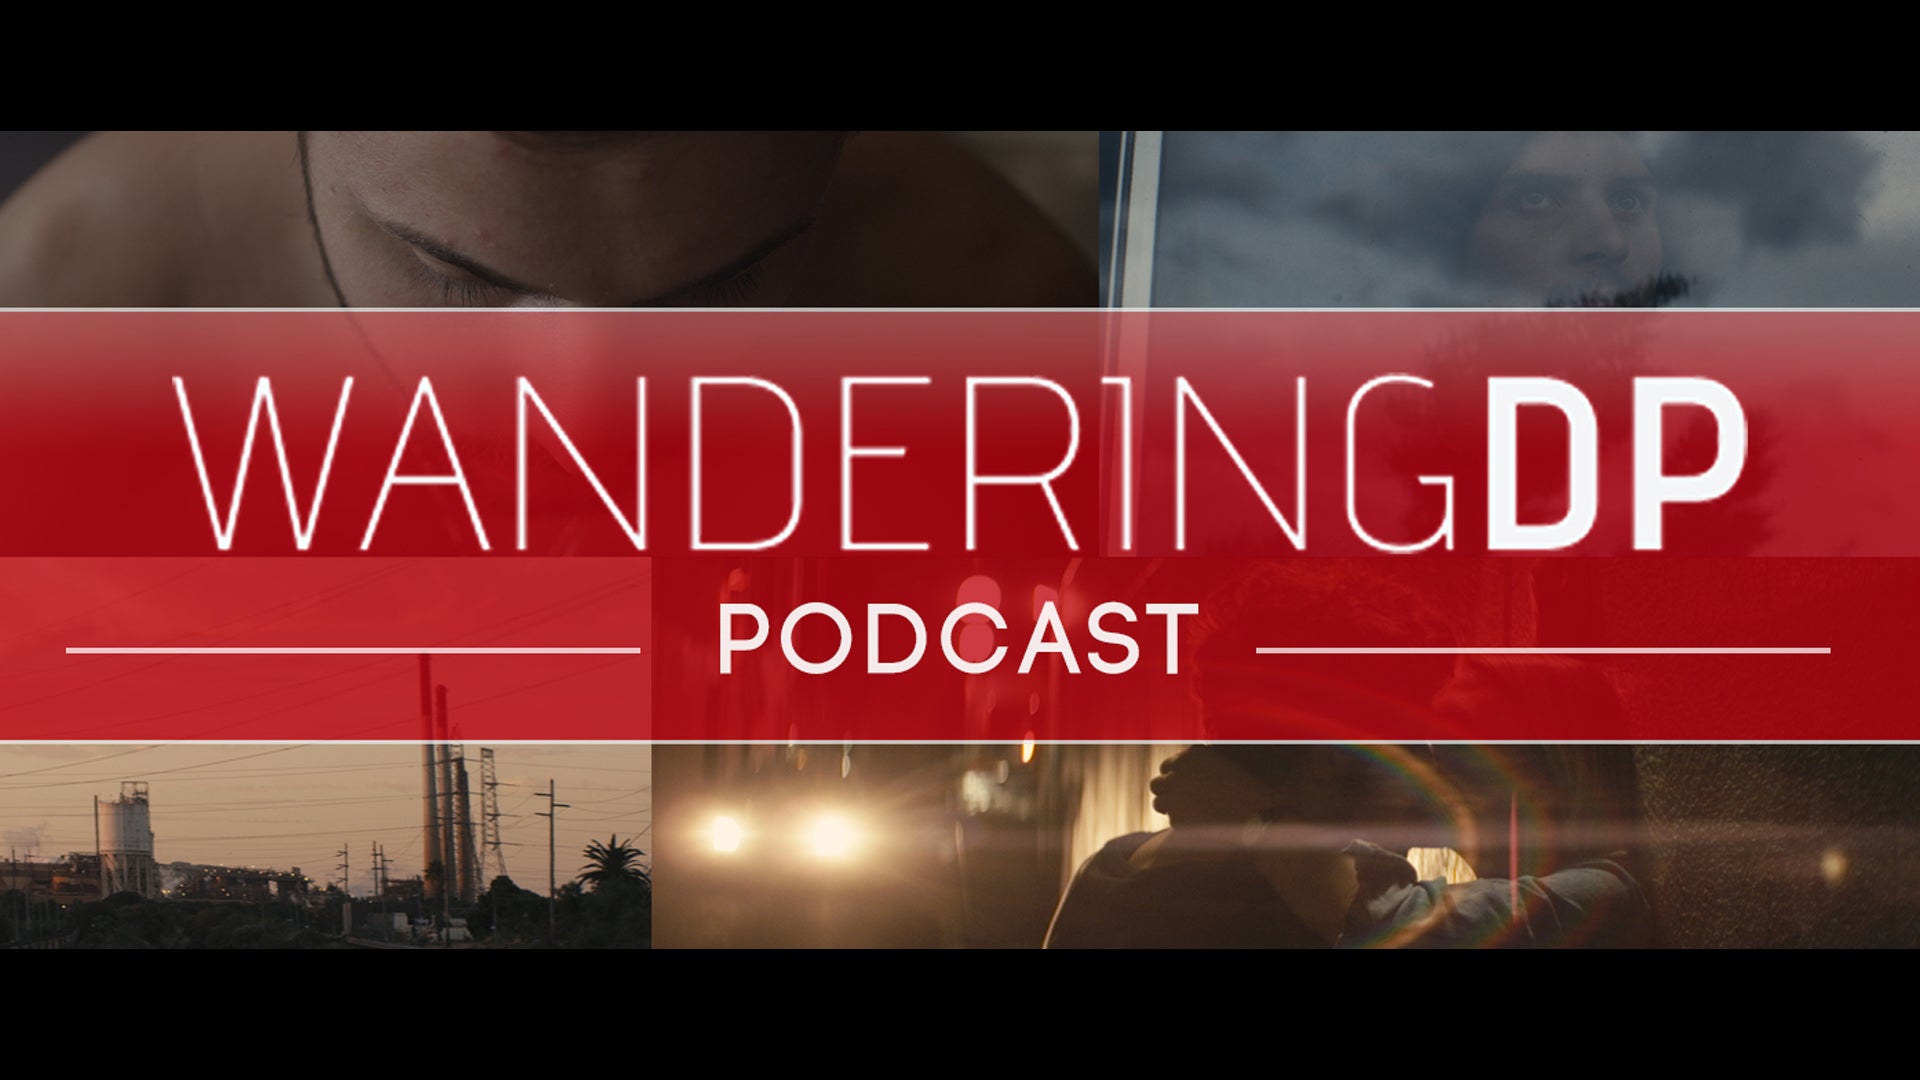 The Wandering DP Podcast: Episodes #1 - #10